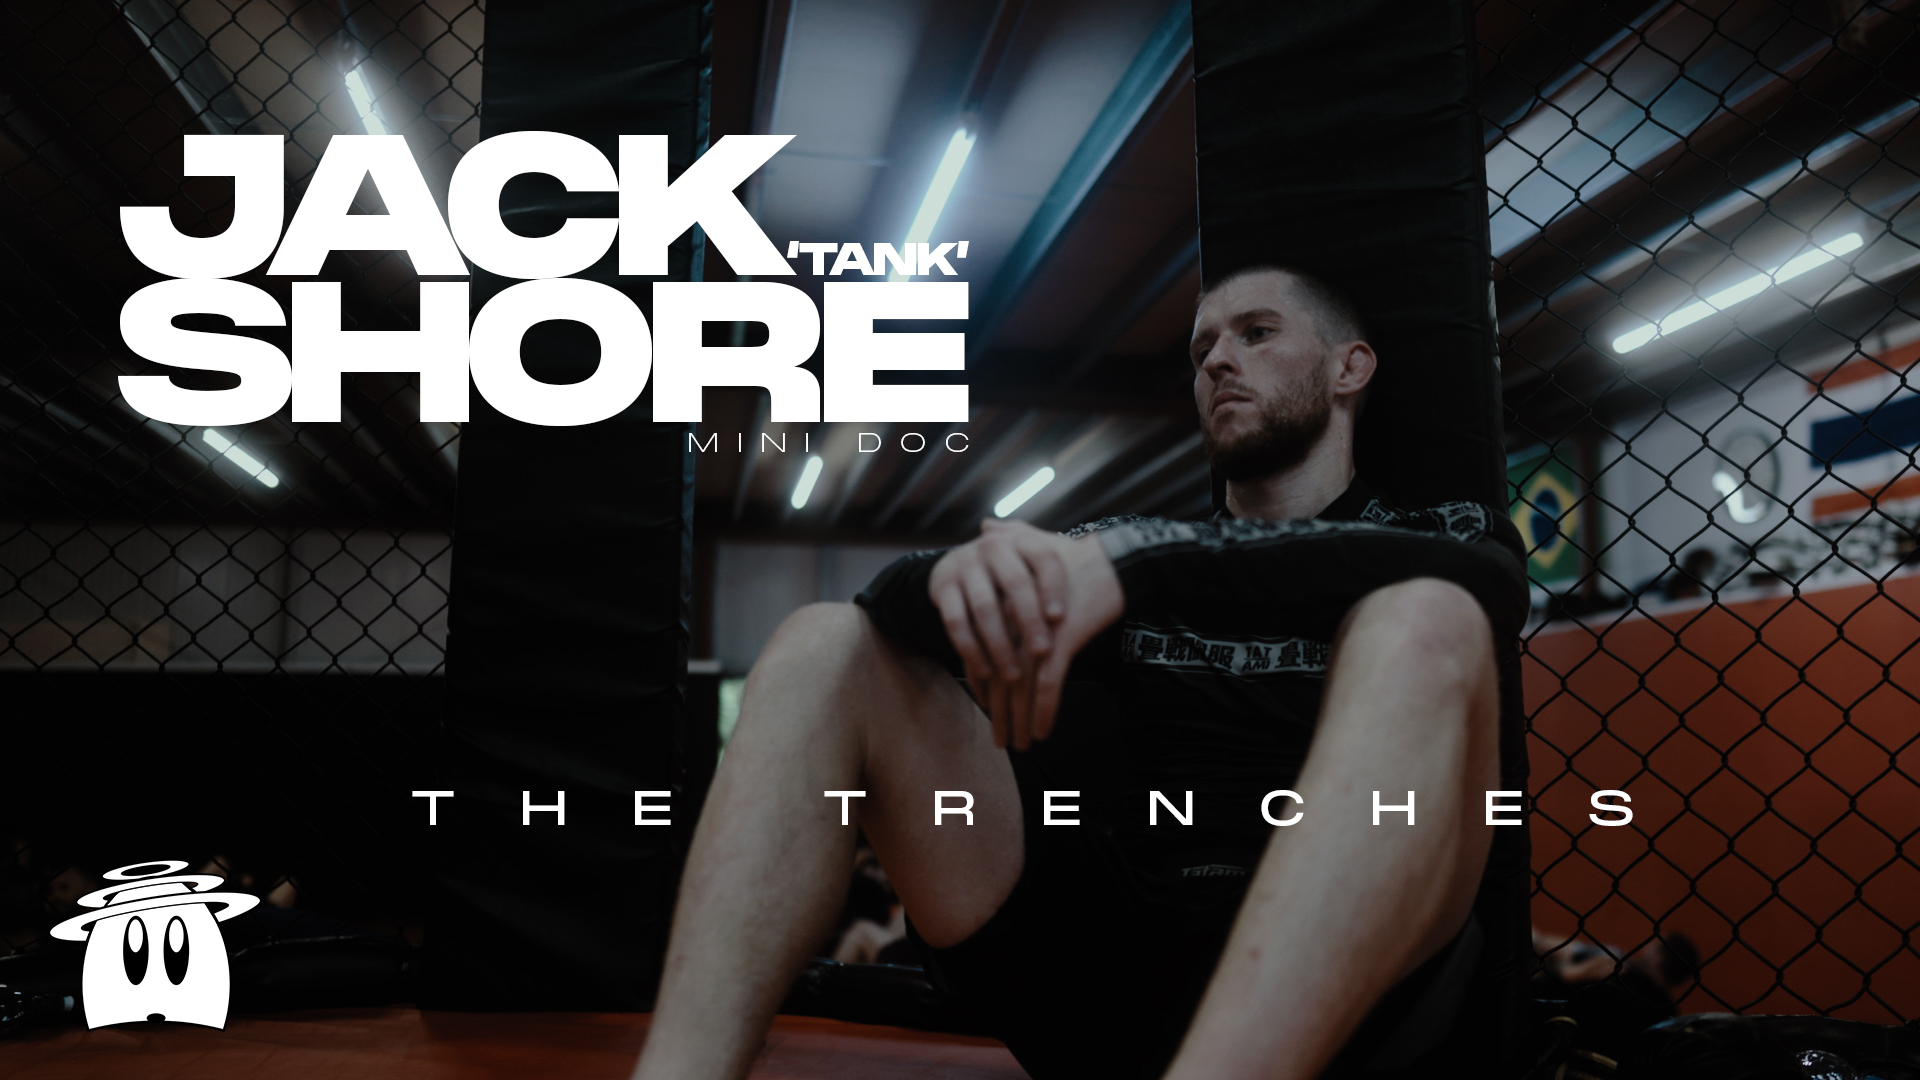 Jack ‘Tank’ Shore Documentary: The Trenches